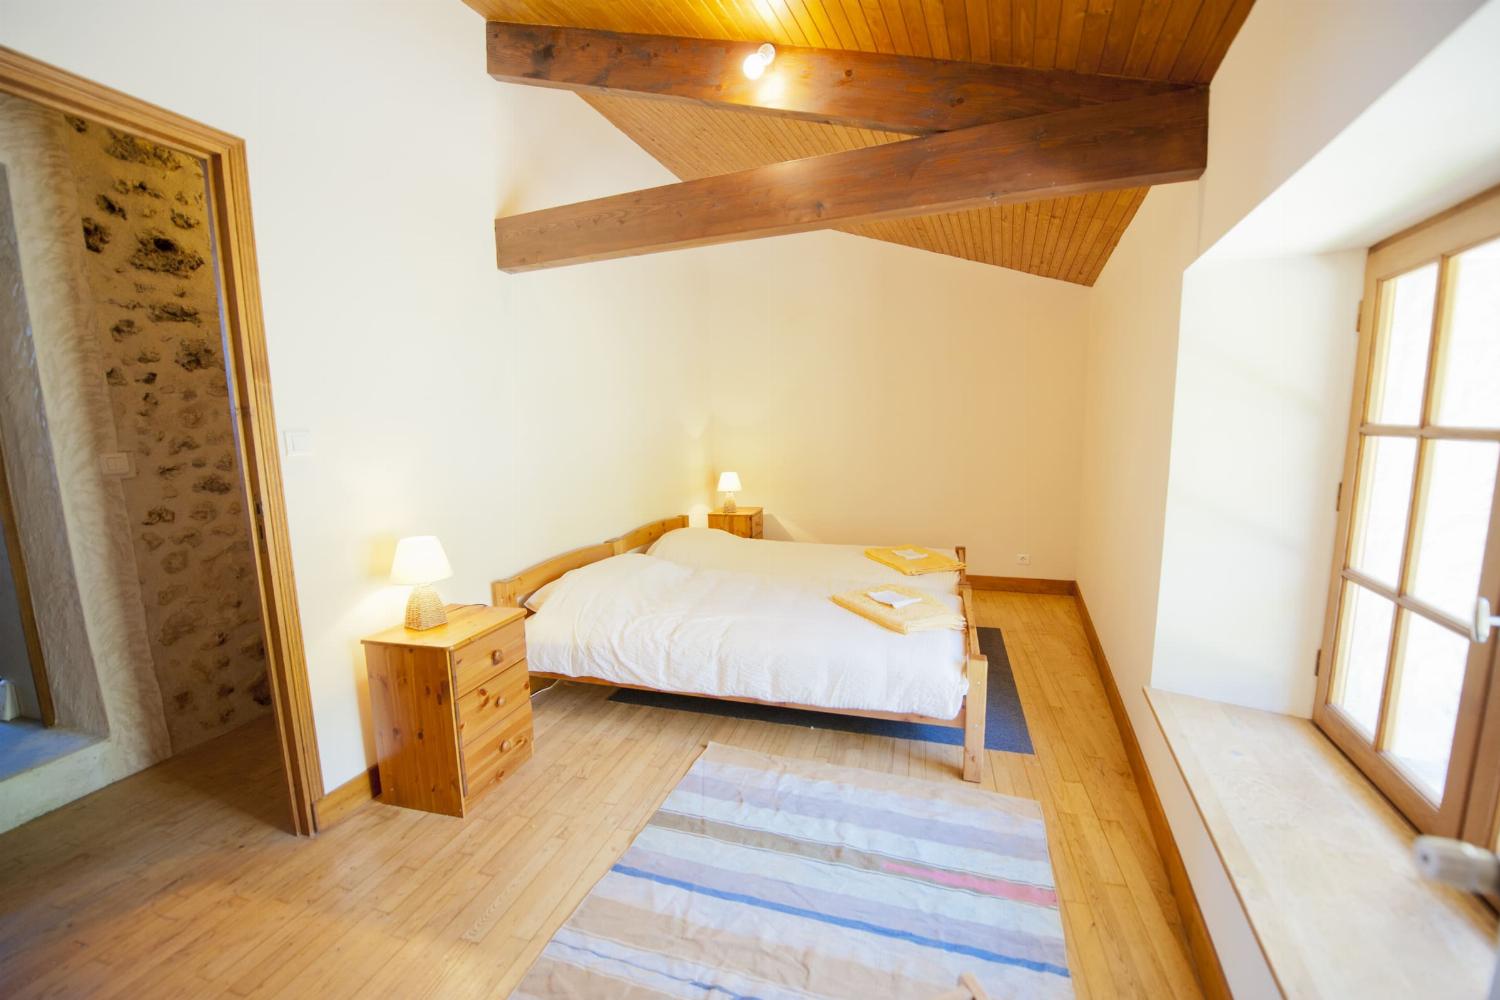 Bedroom | Self-catering home in Charente